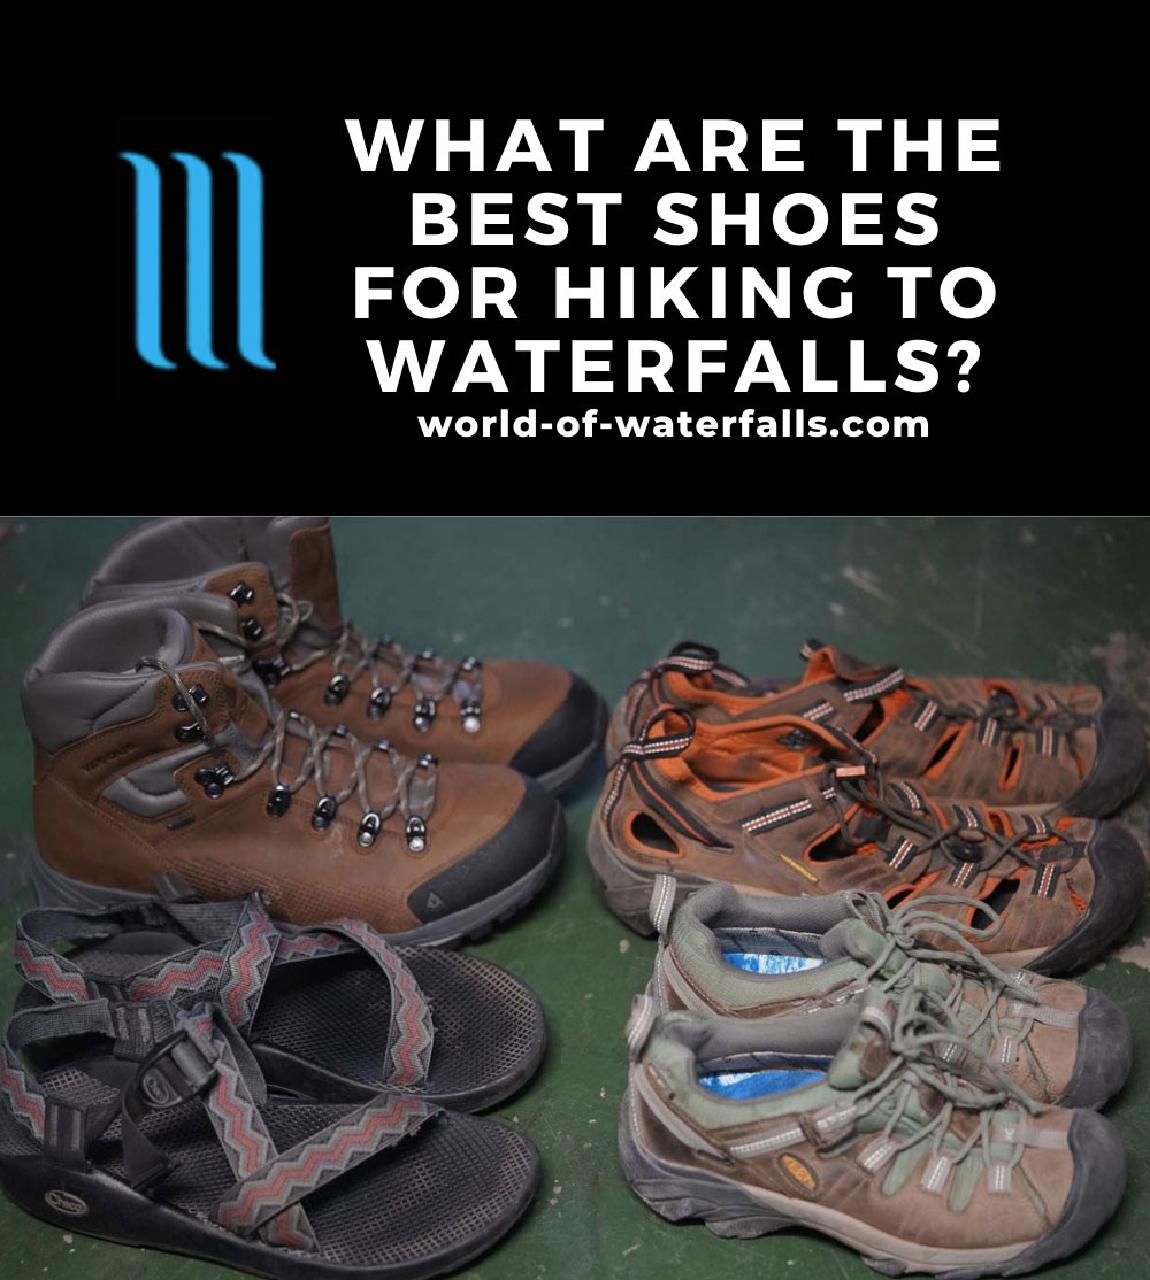 Waterfall hikes typically involve hiking in water. So the choice of footwear from waterproof hiking boots to water shoes or sandals are important considerations on our hikes